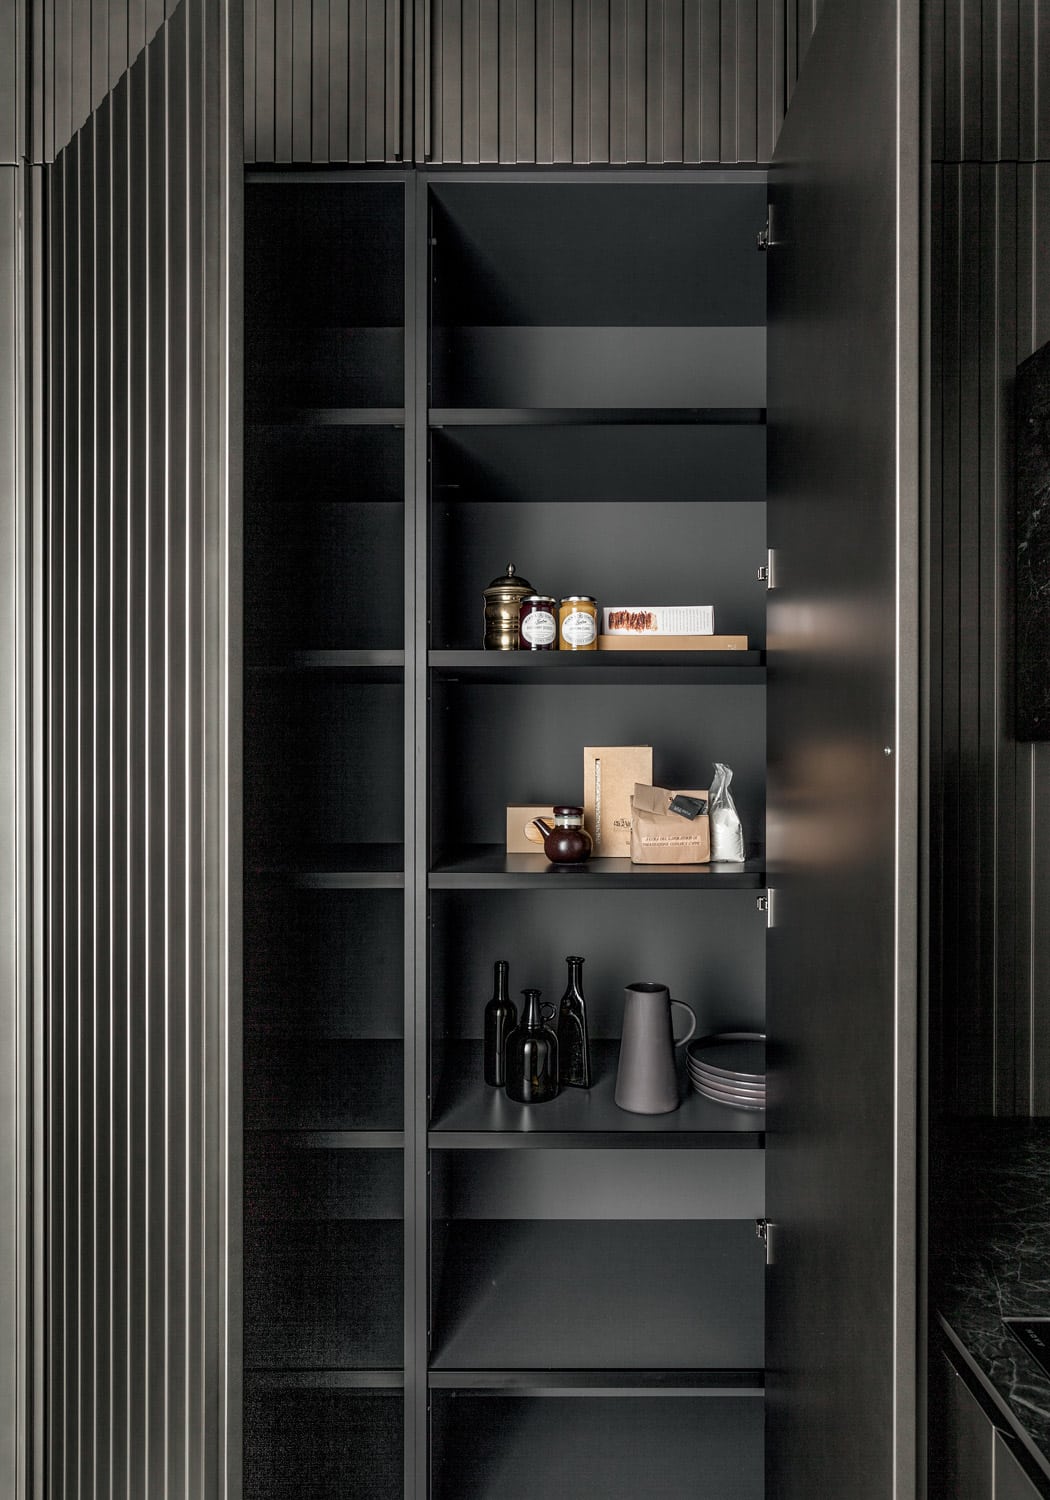 Inside the tall units, the shelves also feature profiles in black anodized aluminum. 